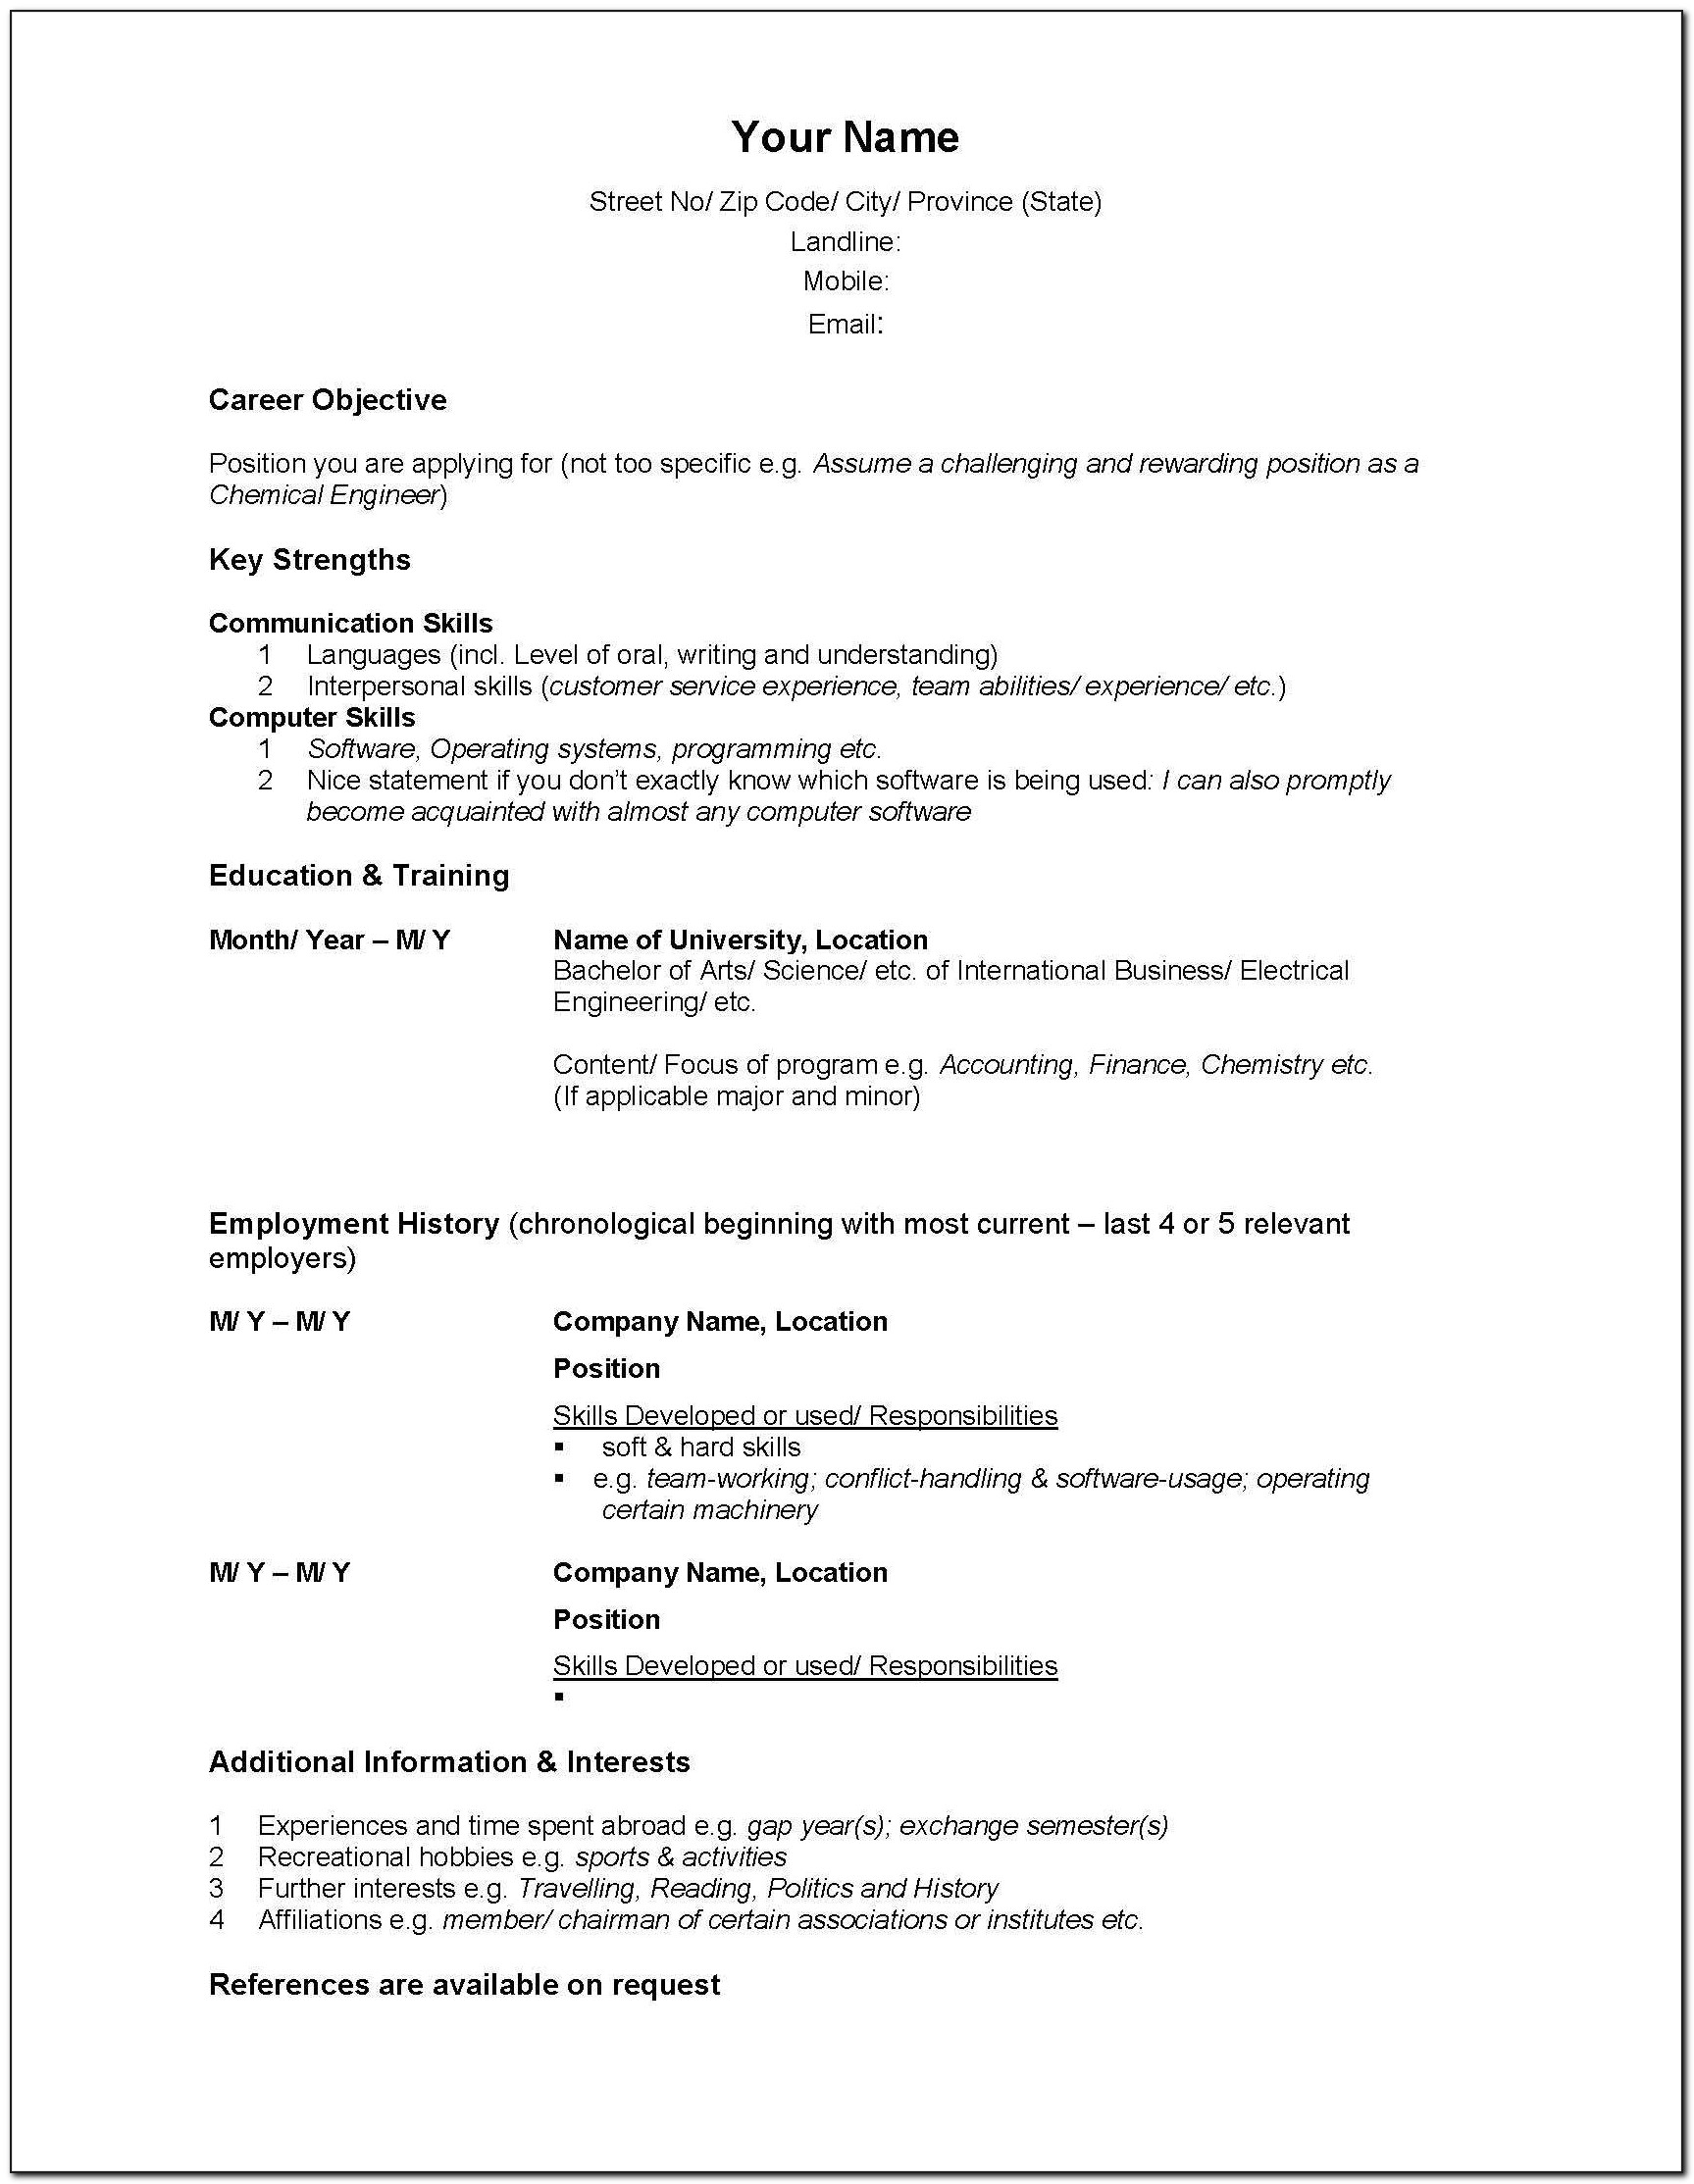 Resume Samples For Banking Jobs In Canada